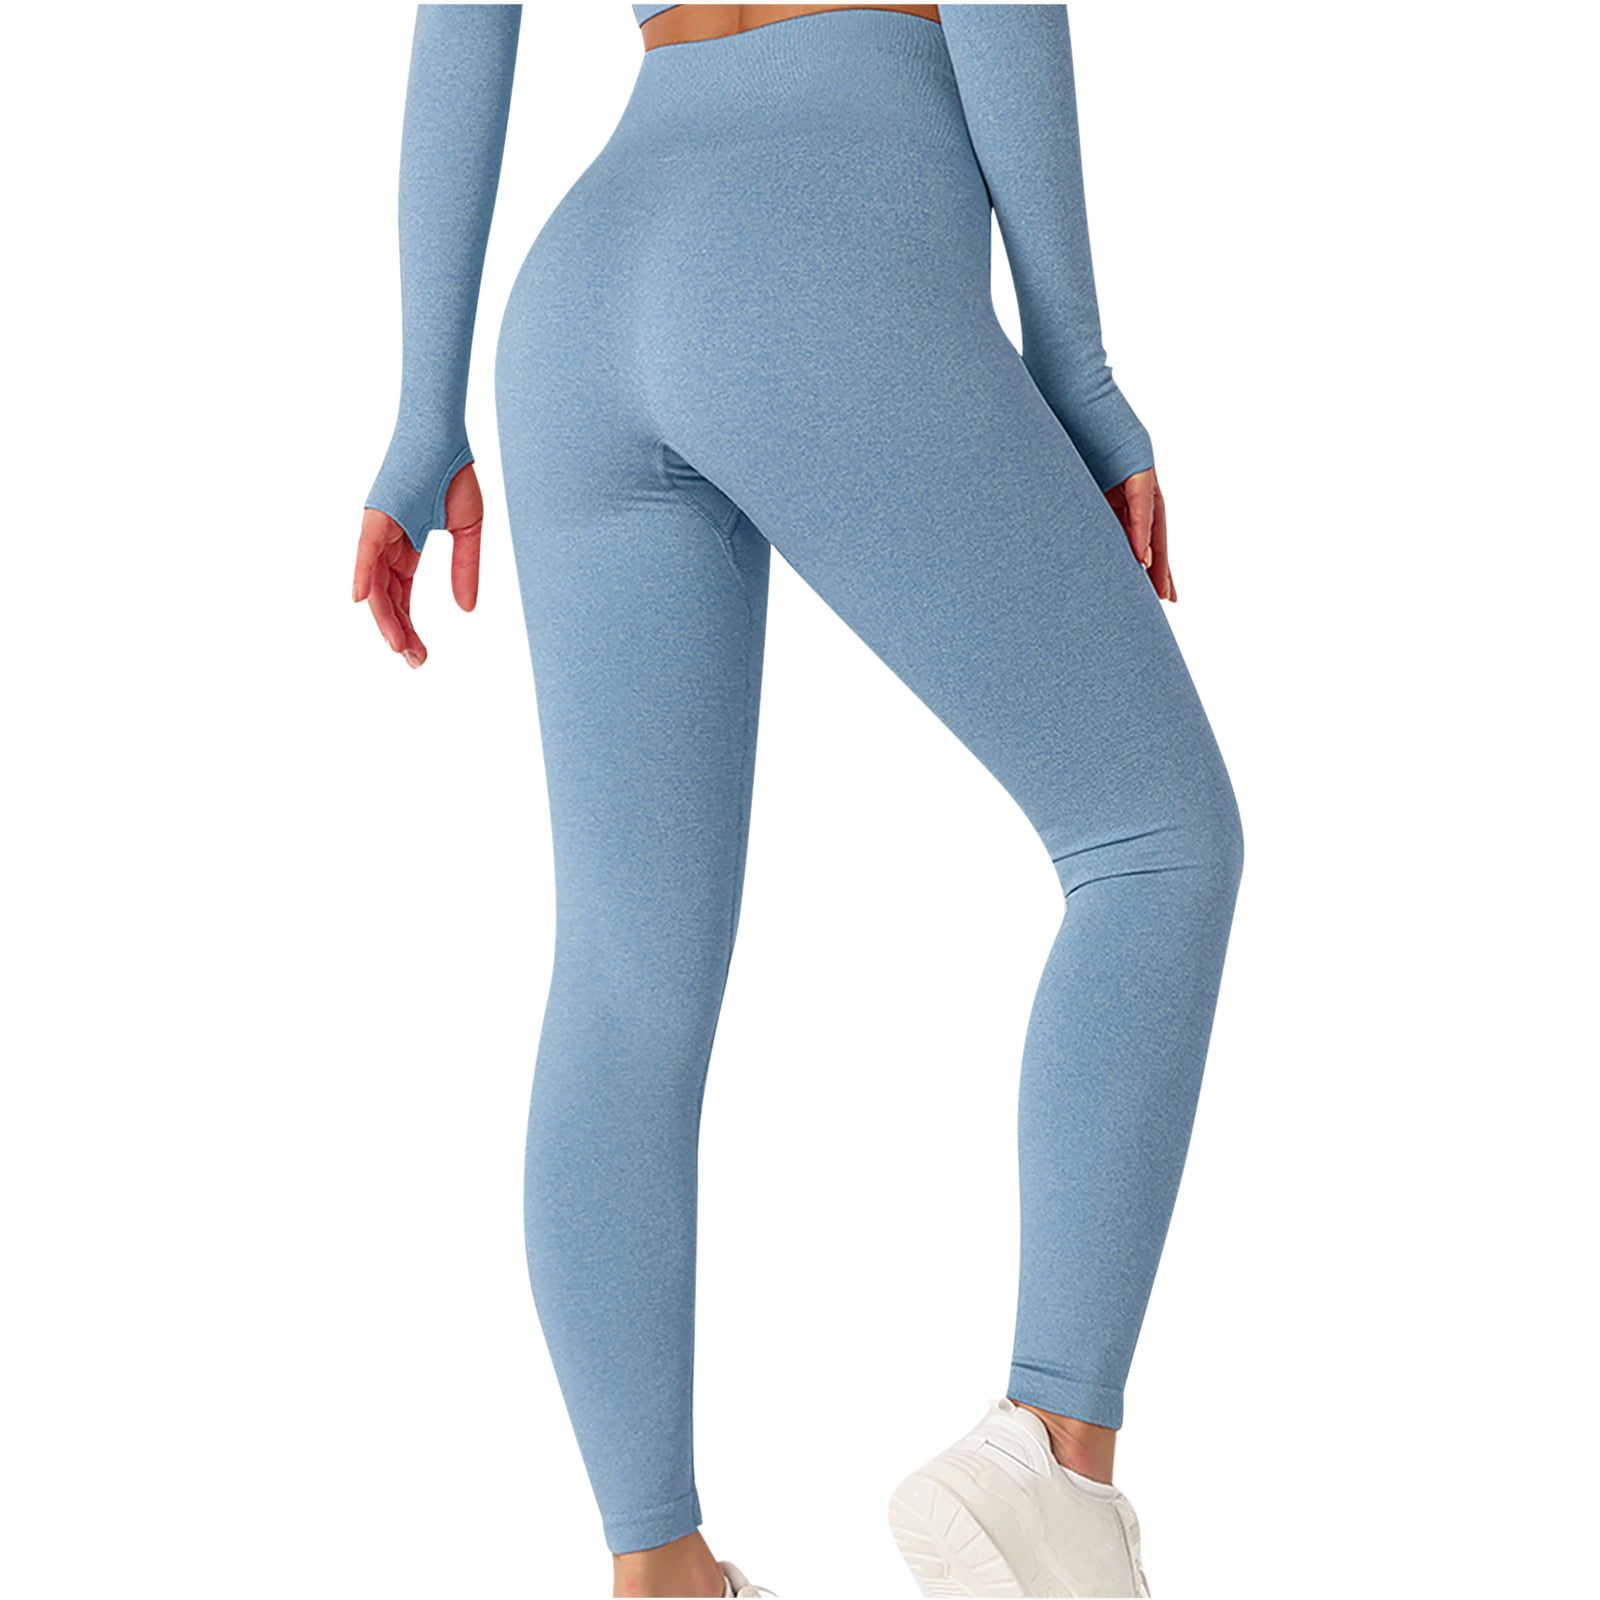 Ernkv Women's Pants Fashion Full Length Trousers Yoga Pants For Lady Wife  Daughter Girlfriend Comfy Lounge Casual Solid Color Blue L